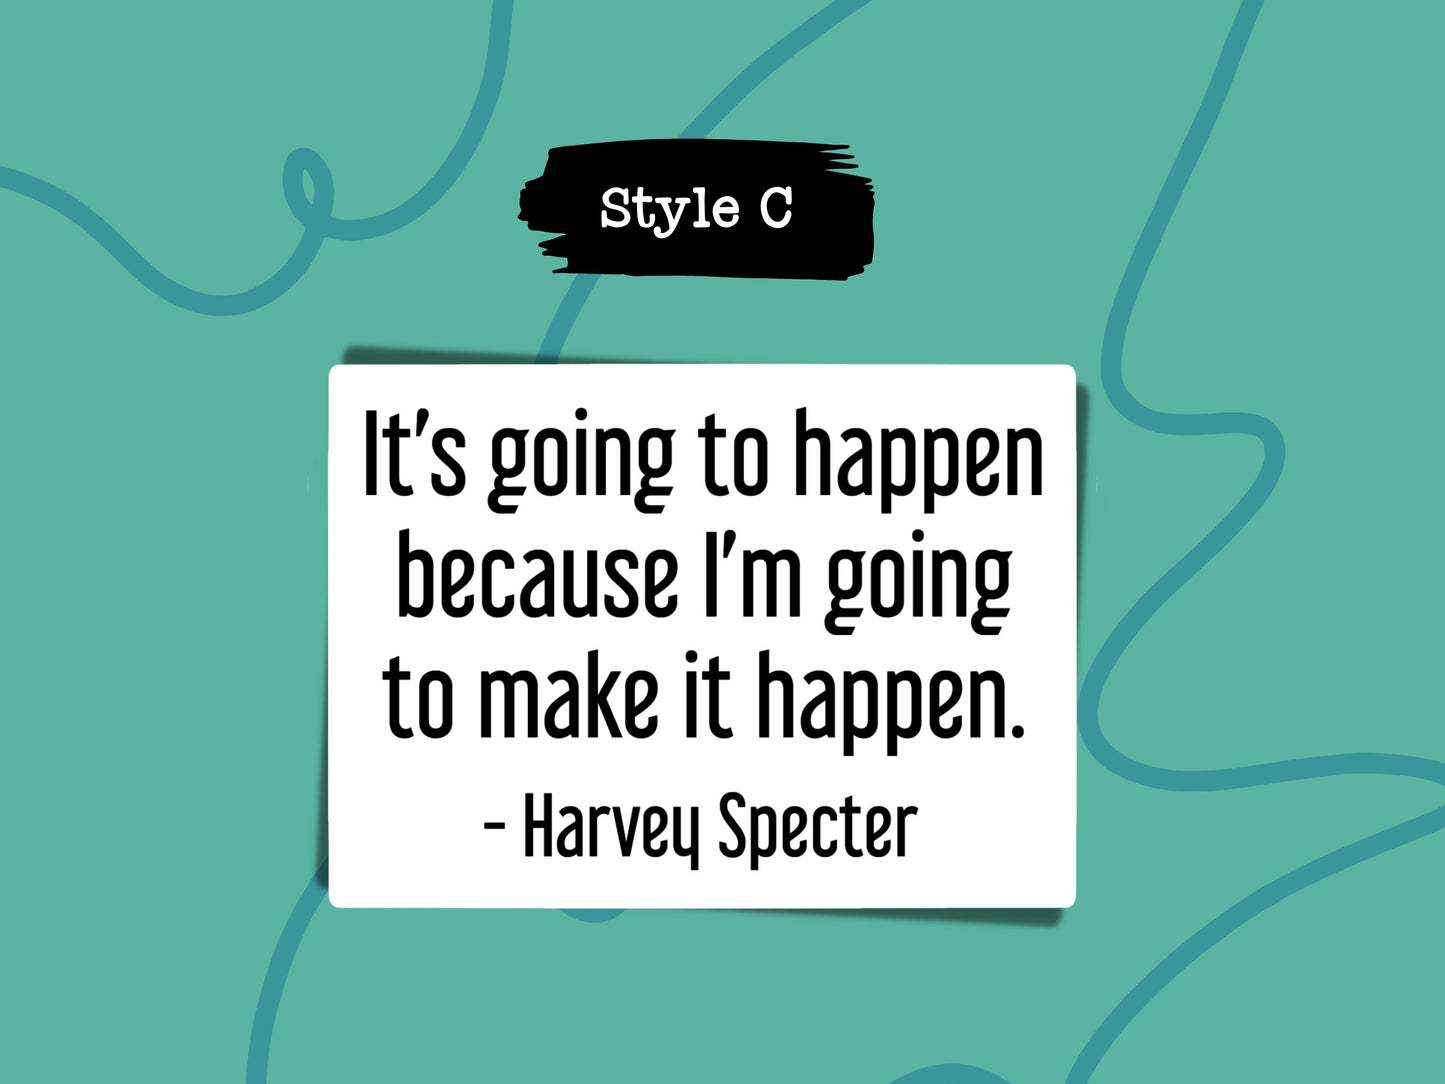 Harvey Specter Quote Sticker Suits TV Show Attorney Law - Variety 1